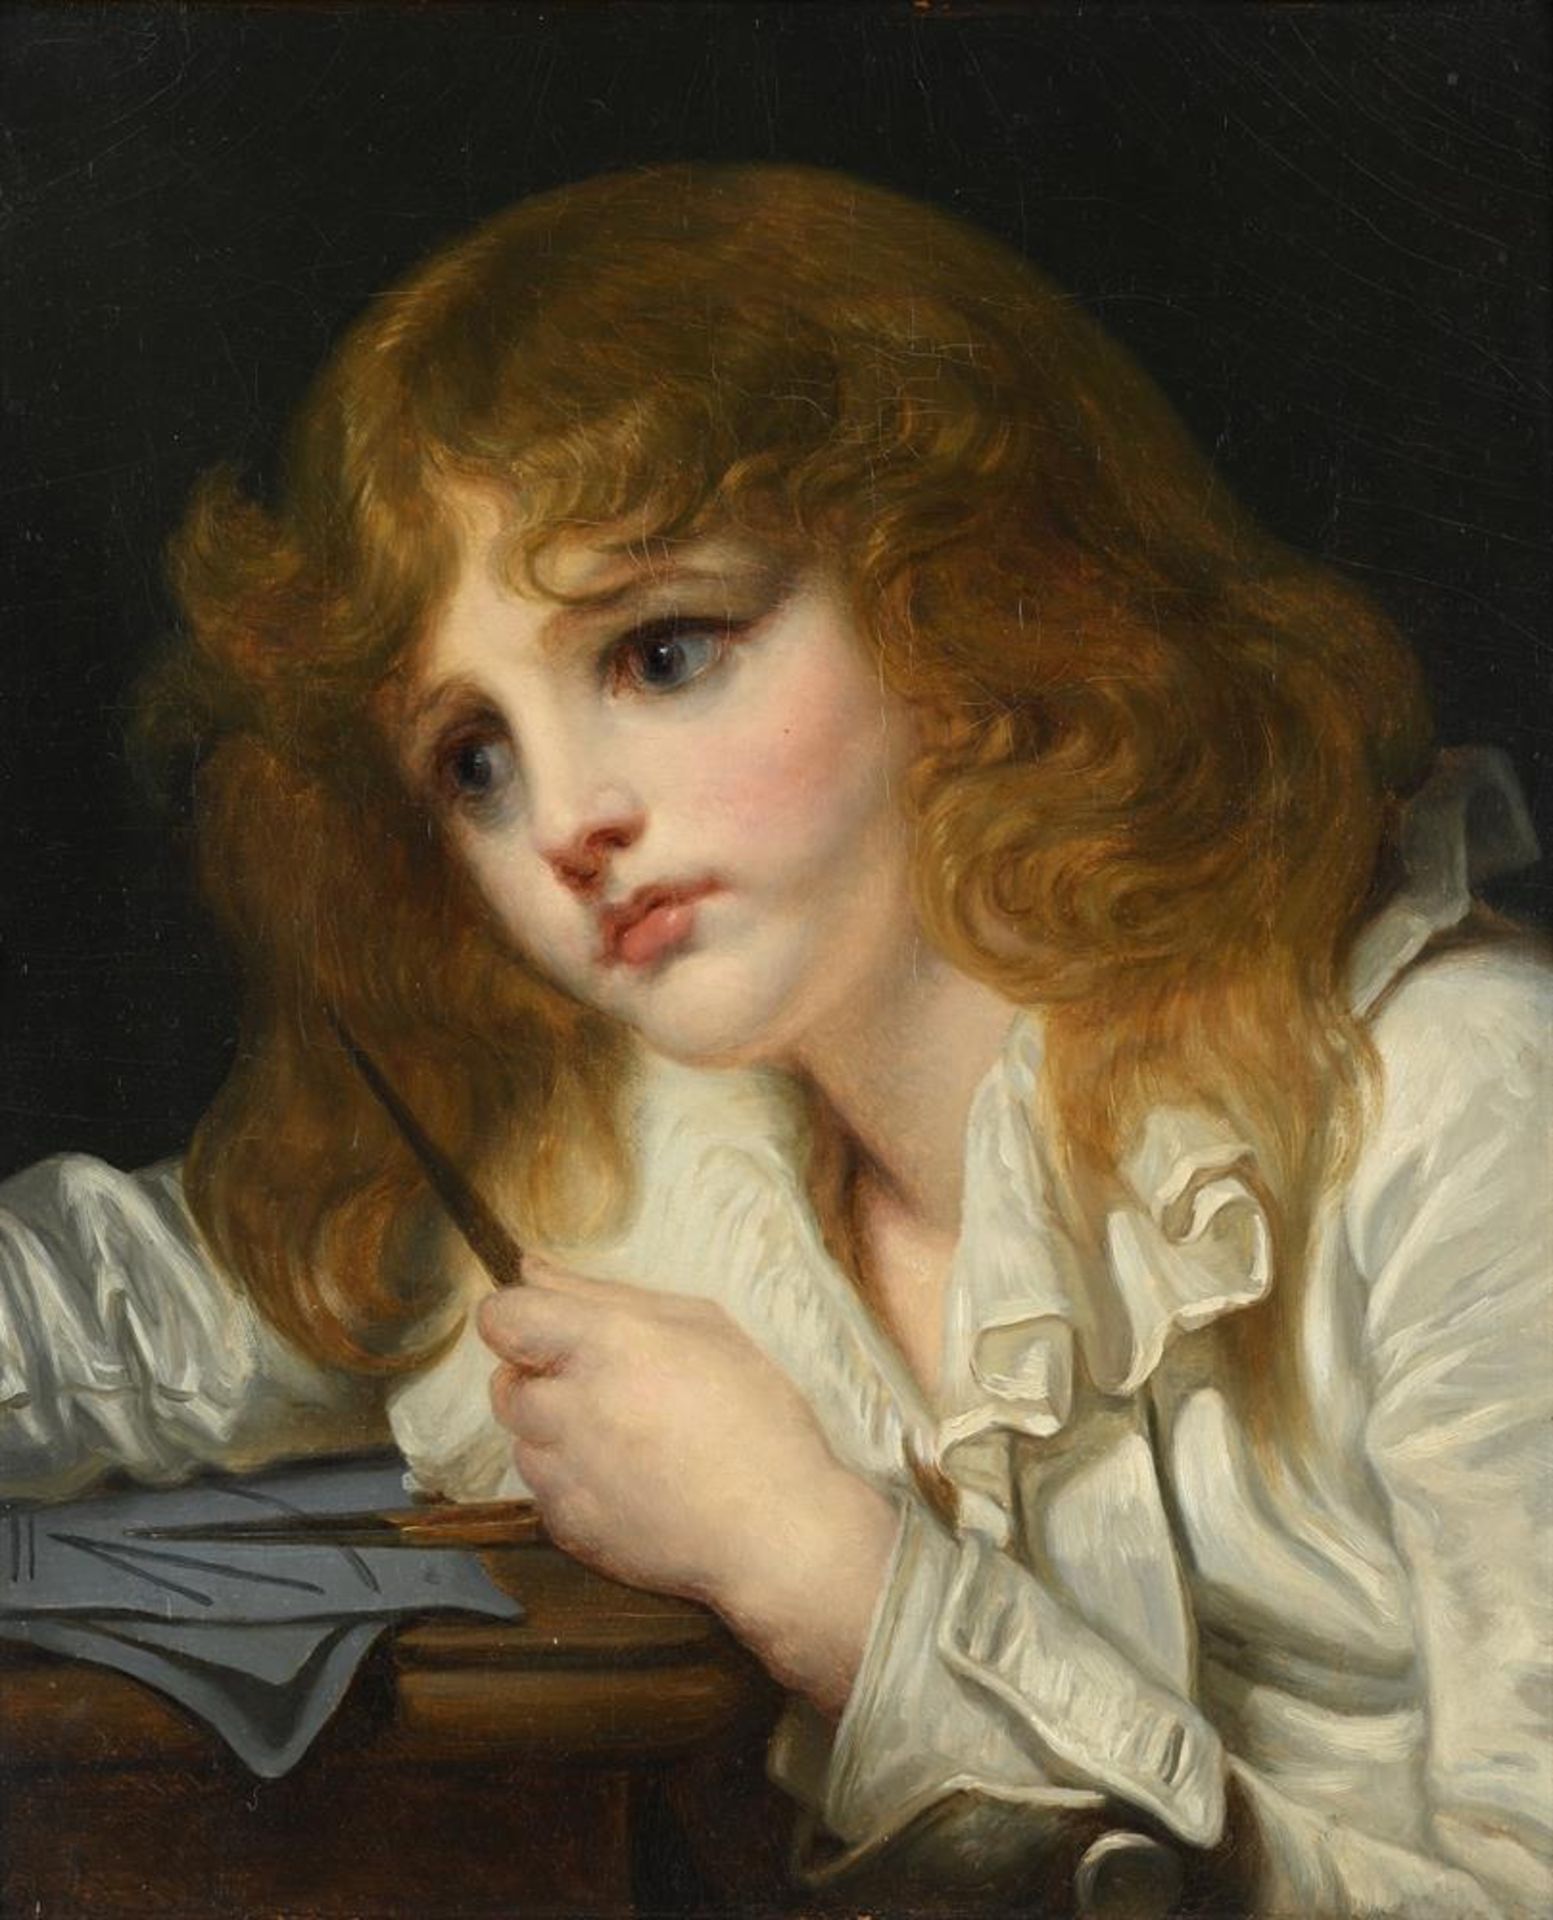 JEAN BAPTISTE GREUZE (FRENCH 1725-1805), THE YOUNG MATHEMATICIAN